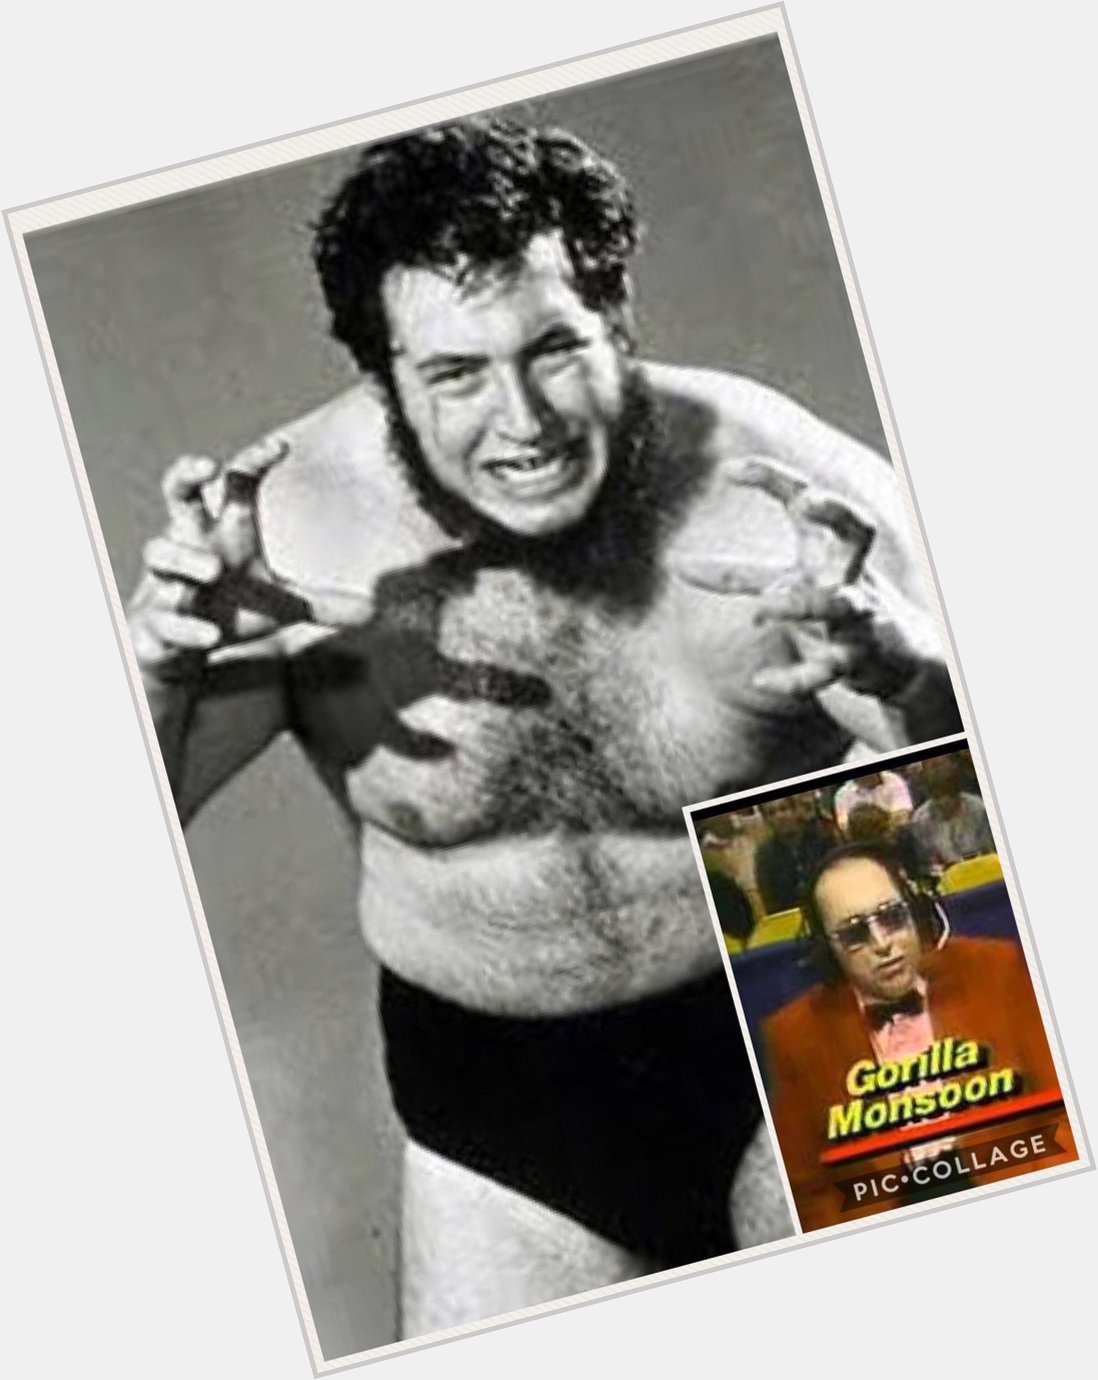 Happy birthday to Gorilla Monsoon. The only man good enough to call his own action.   